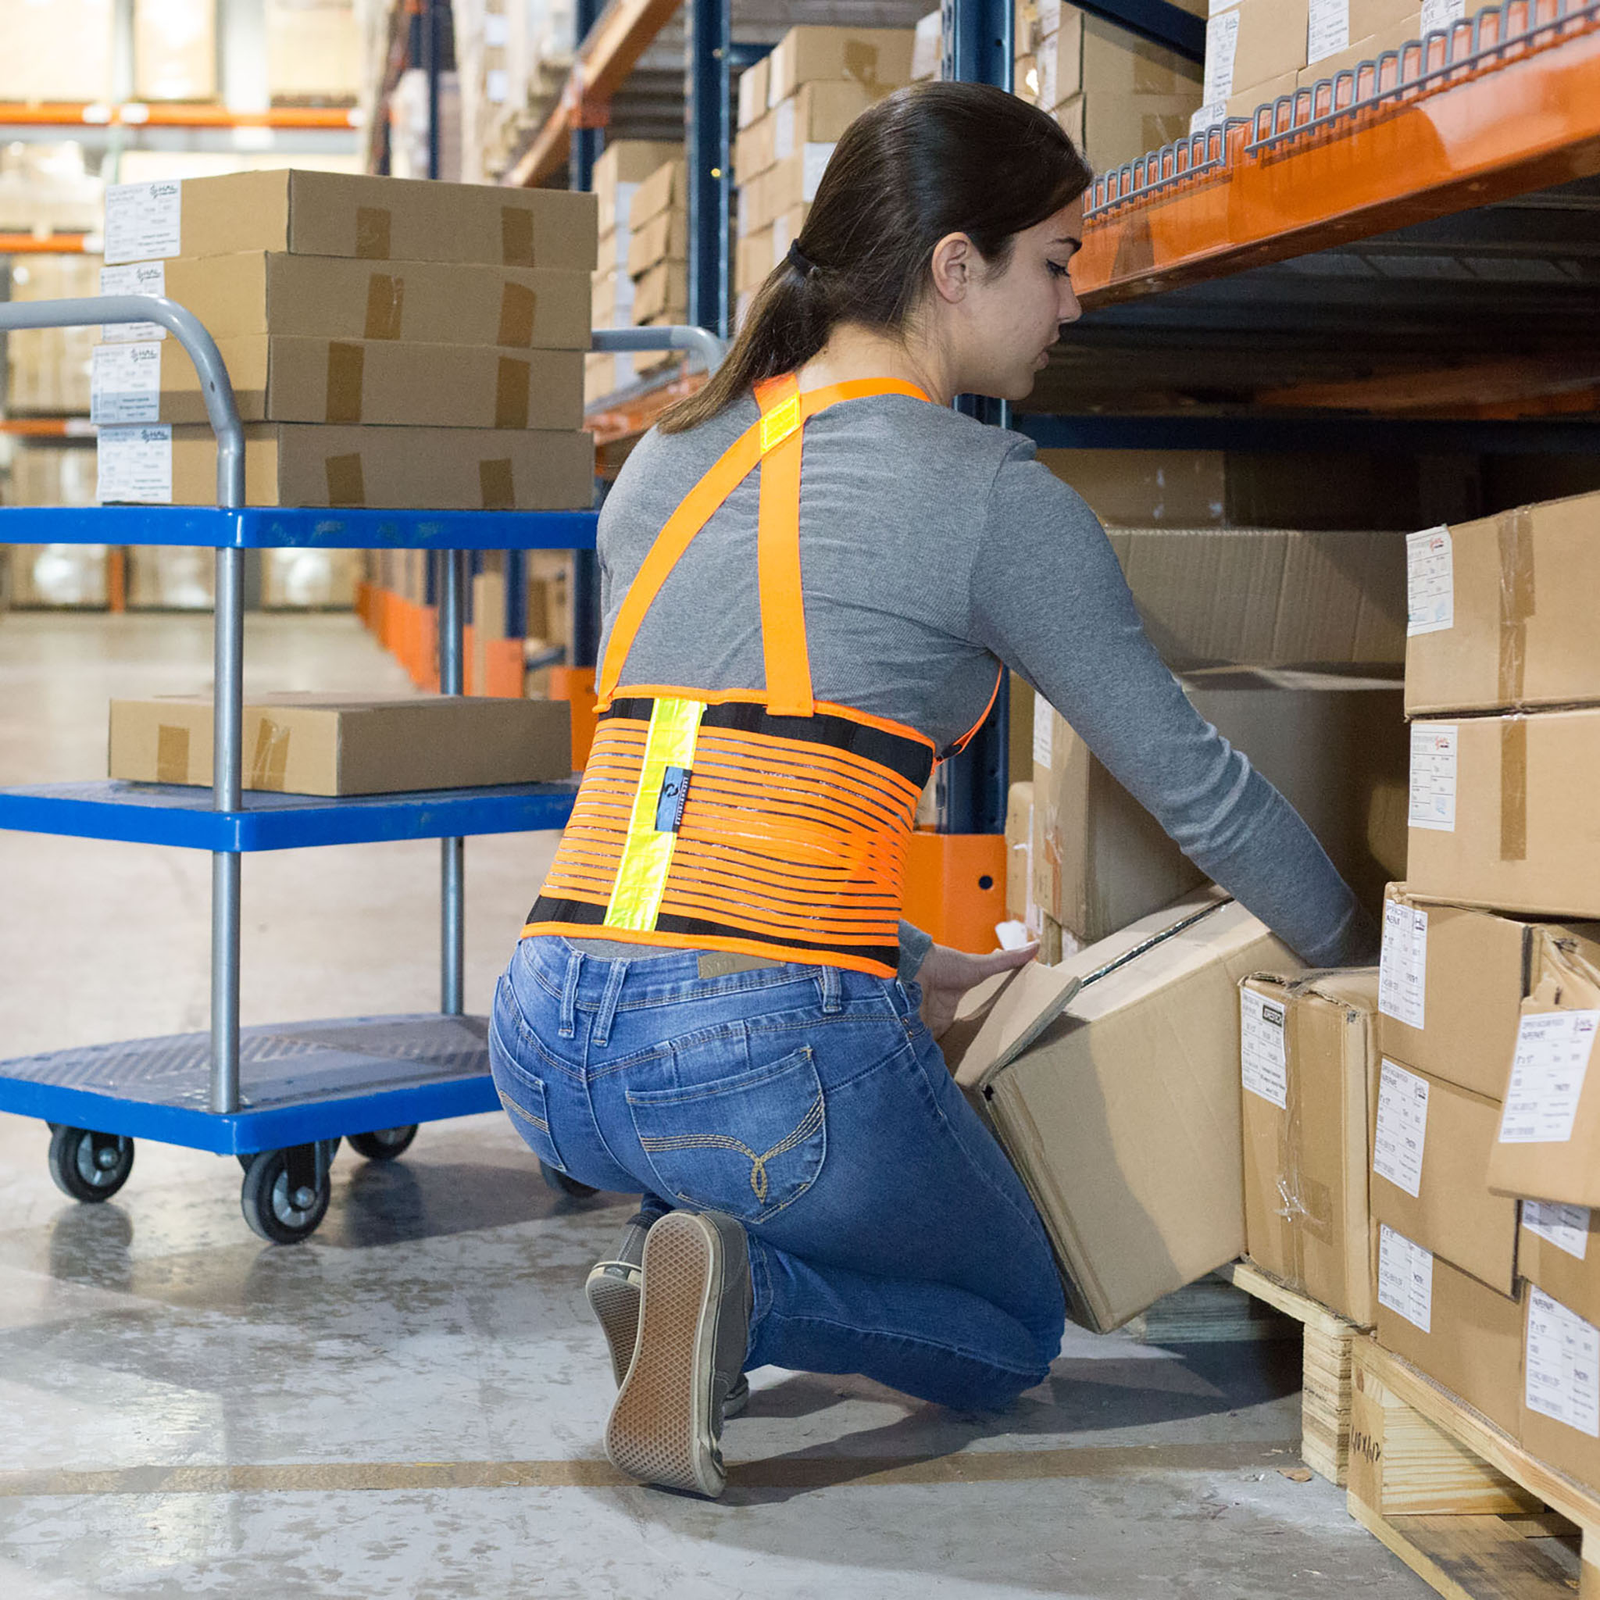 A lady wearing a high visibility adjustable back support belt with reflective stripes while carrying a box in a warehouse. Bright orange color and adjustable straps can be seen in the back.